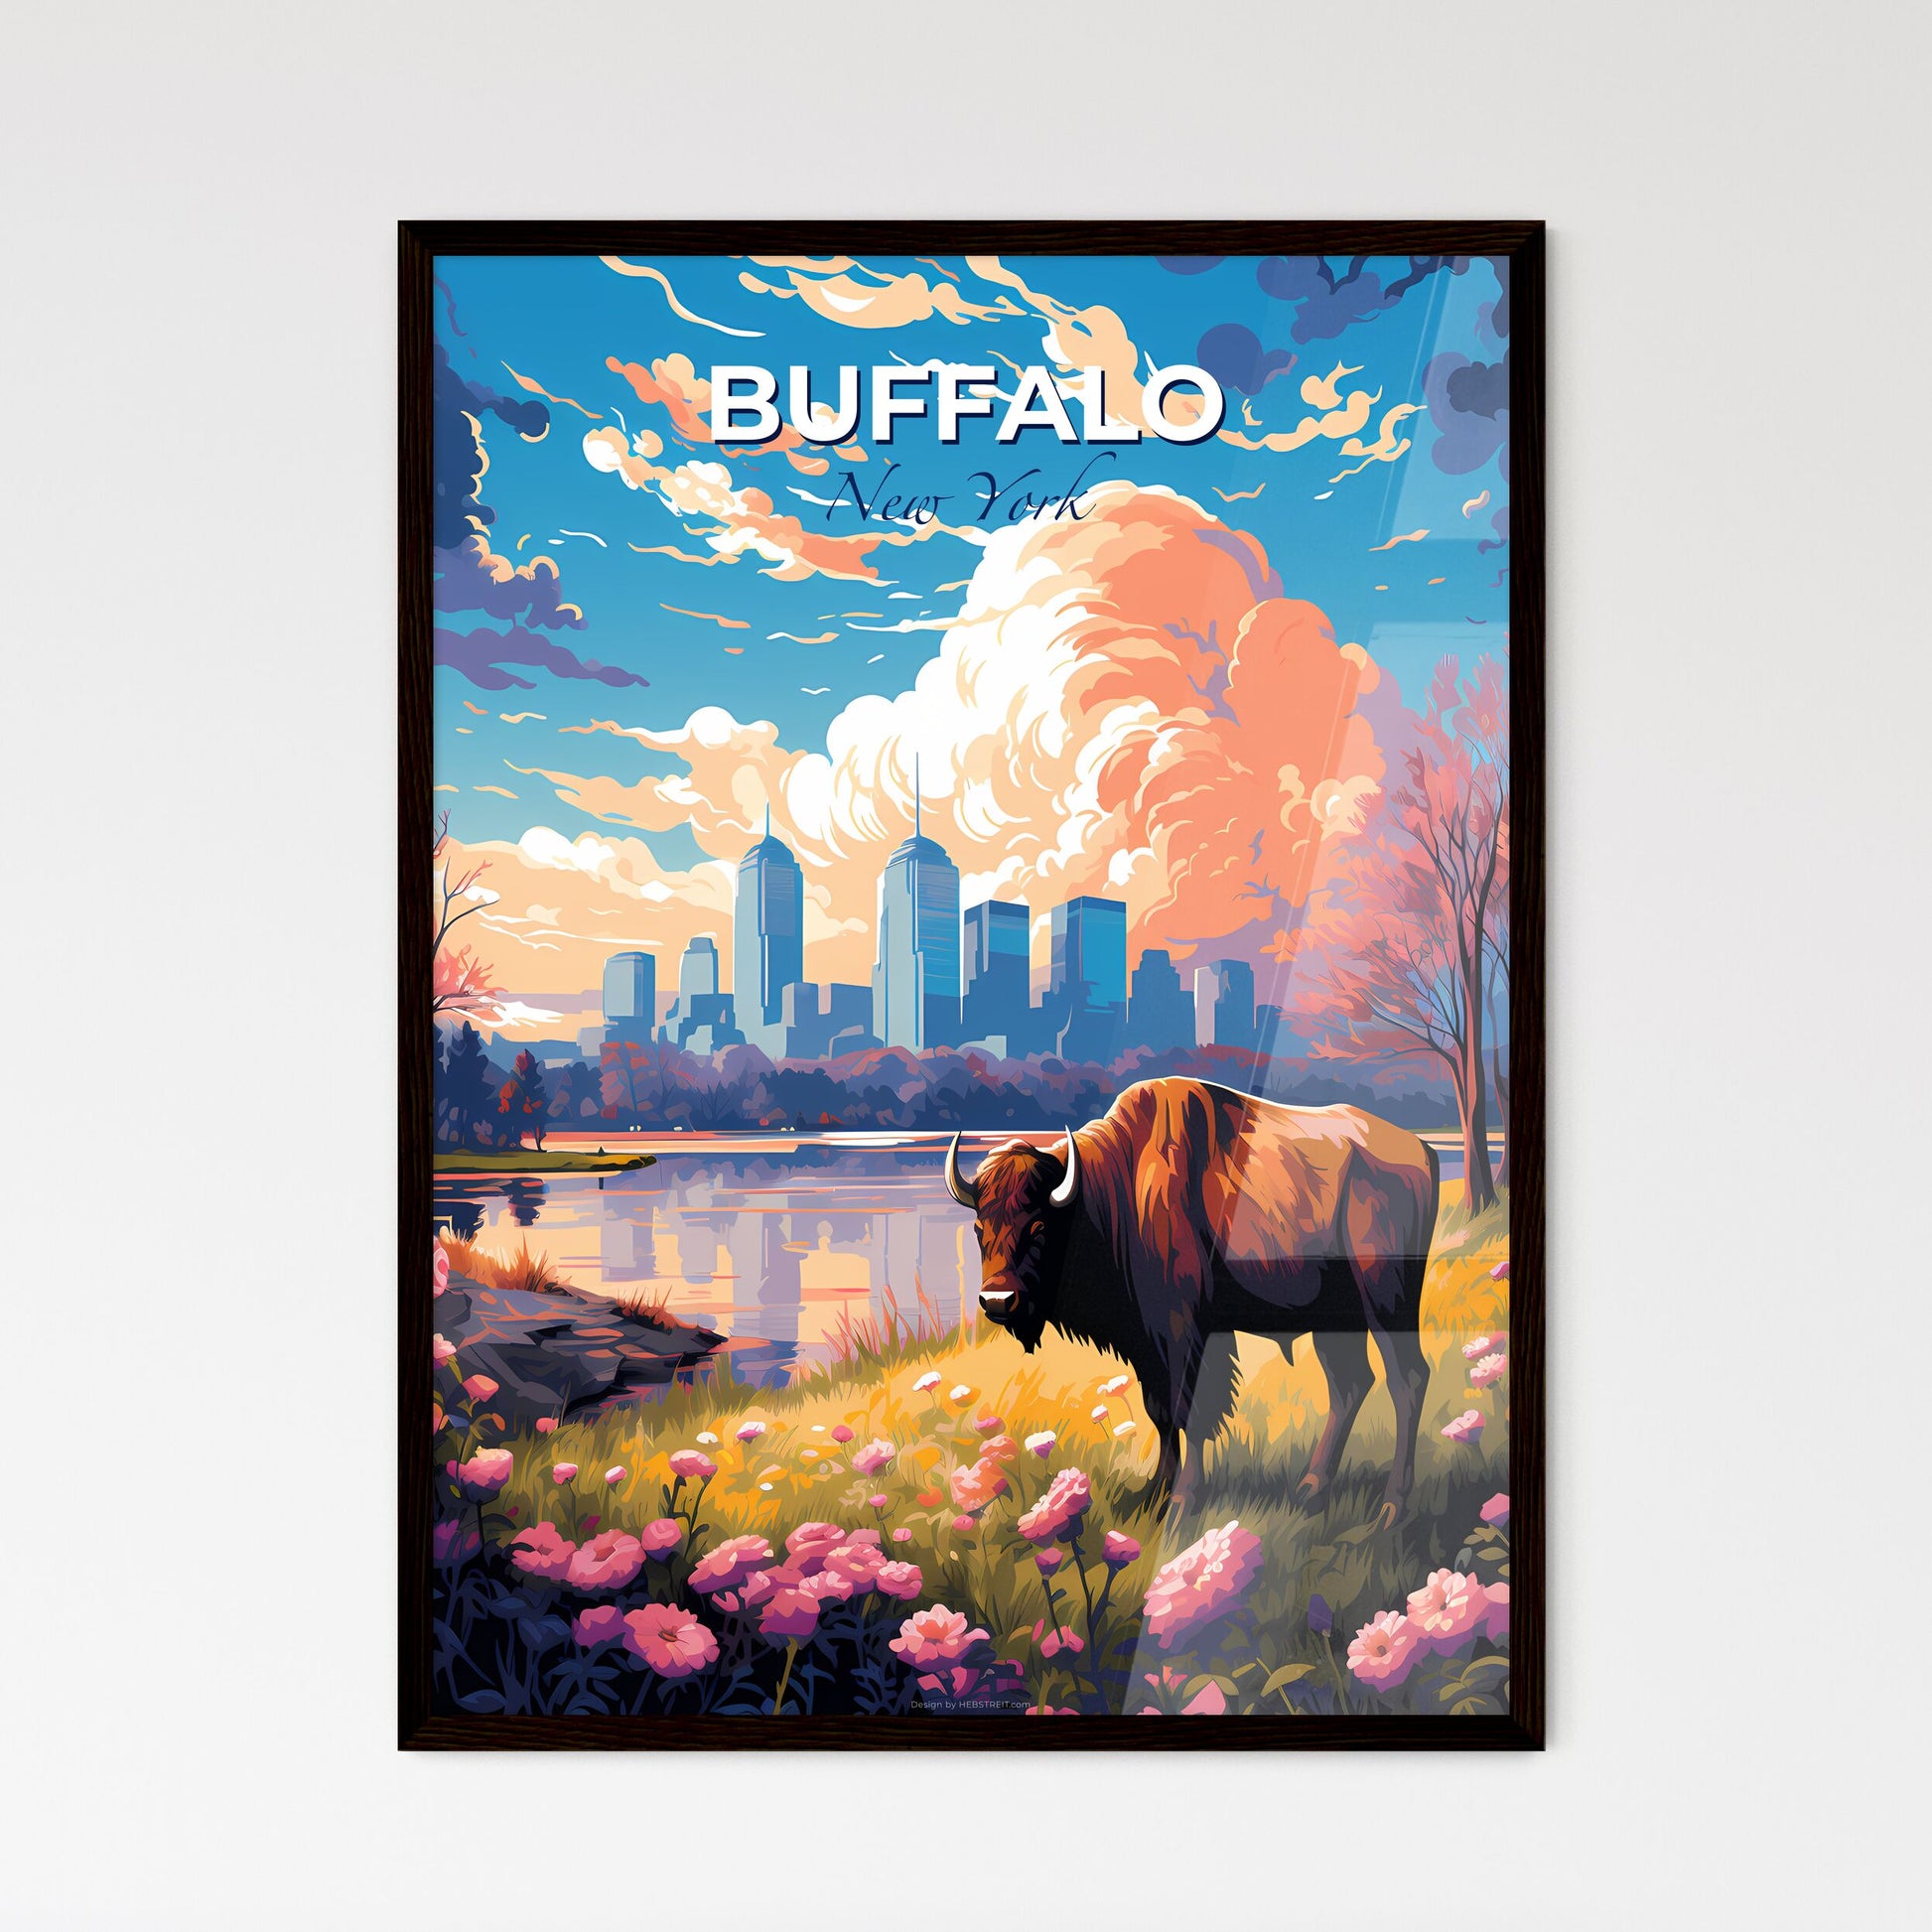 Buffalo New York Skyline - A Buffalo Standing In A Grassy Field Next To A Body Of Water - Customizable Travel Gift Default Title